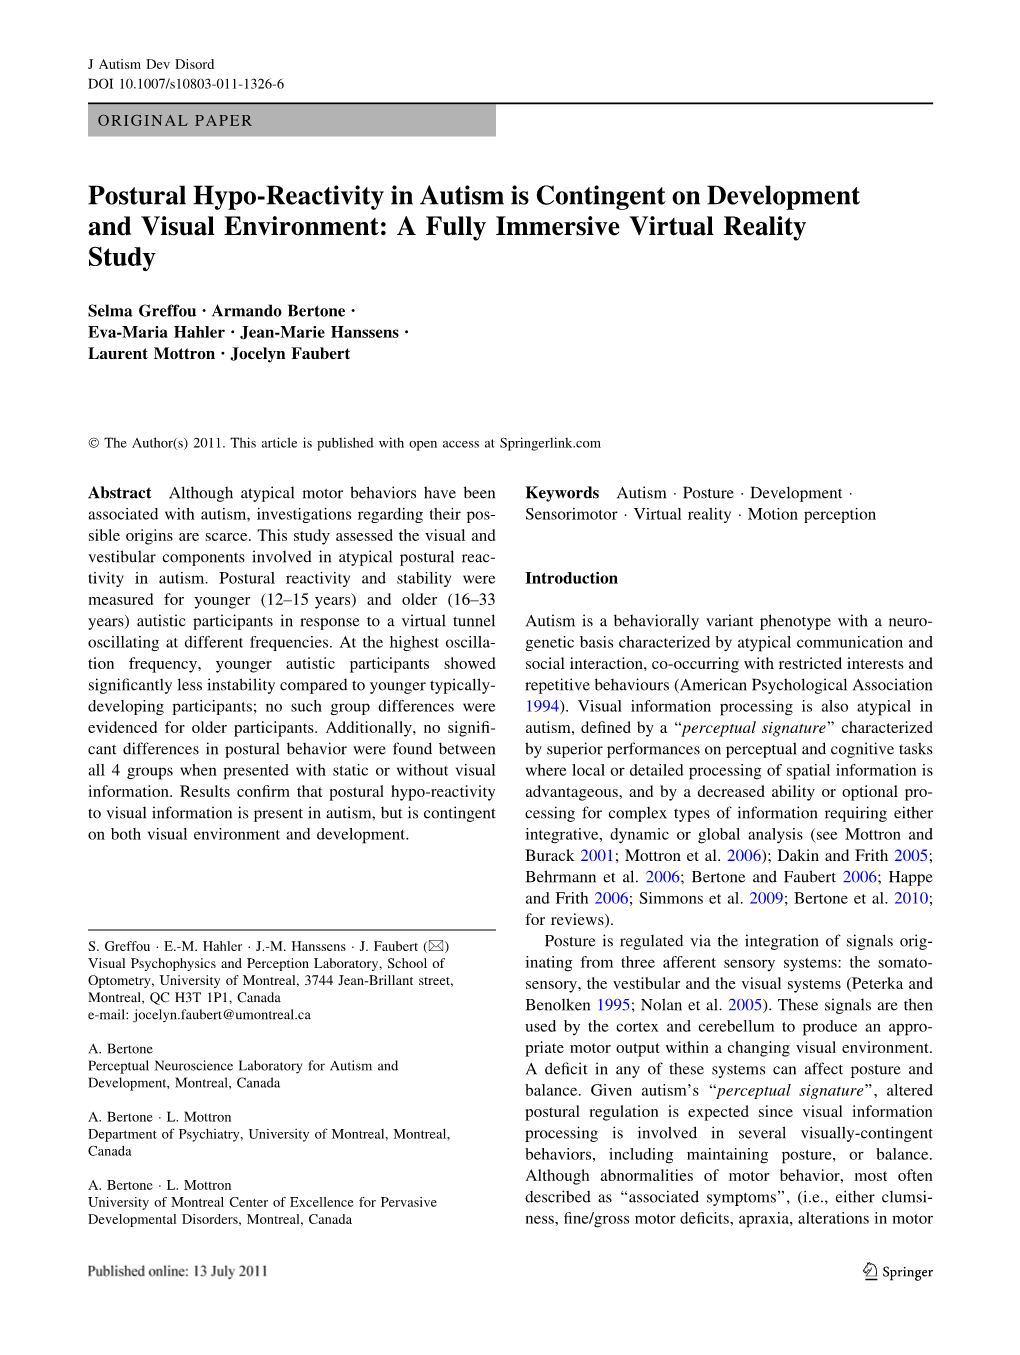 Postural Hypo-Reactivity in Autism Is Contingent on Development and Visual Environment: a Fully Immersive Virtual Reality Study